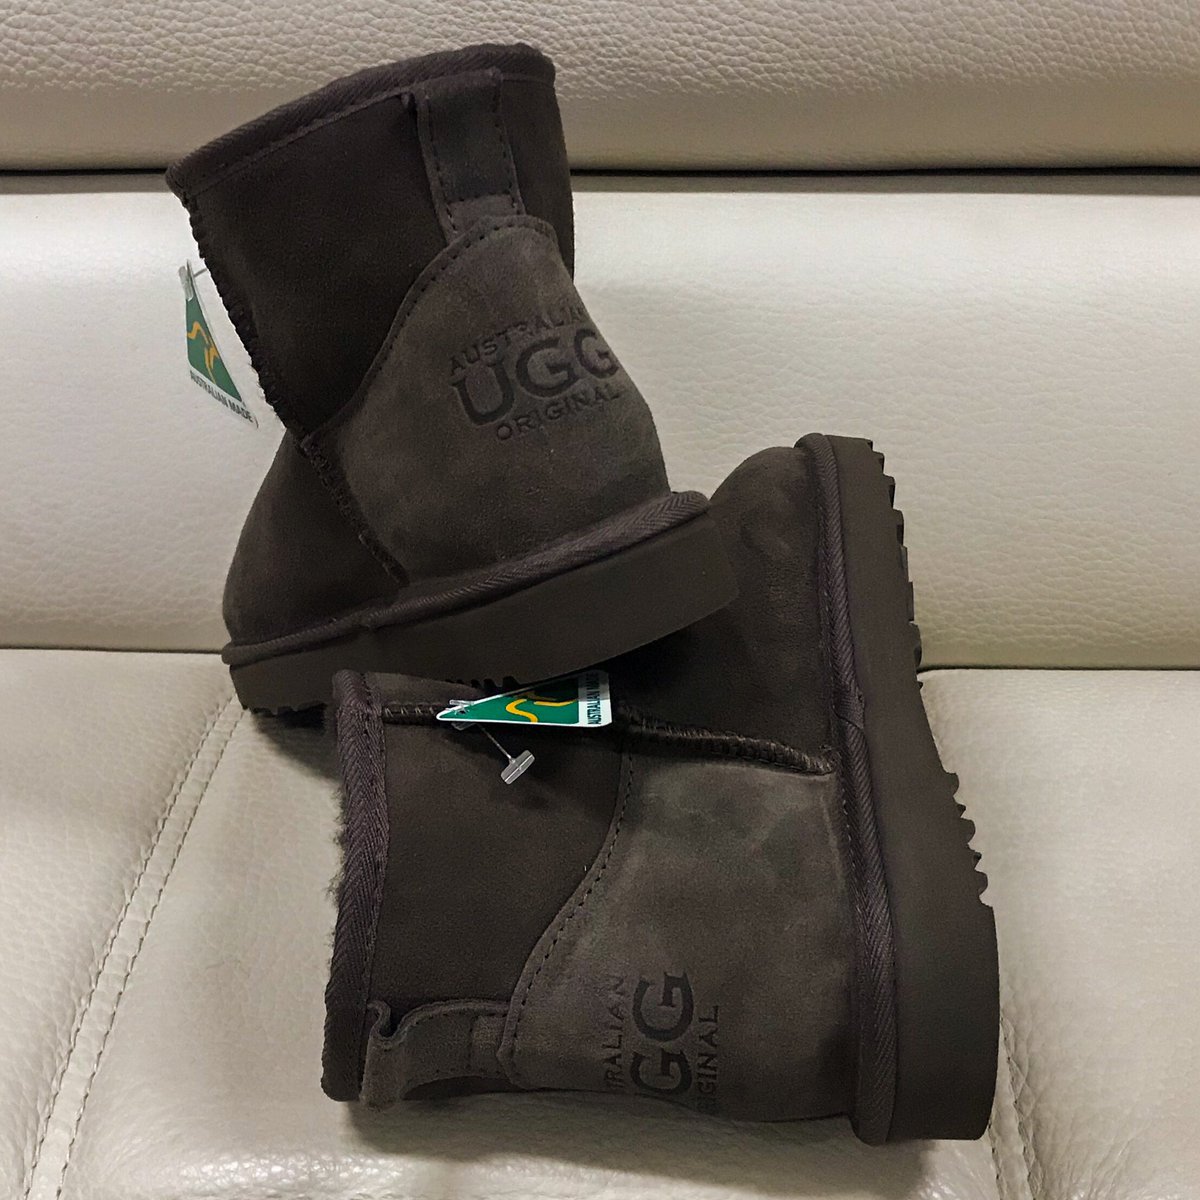 ugg boots buy now pay later